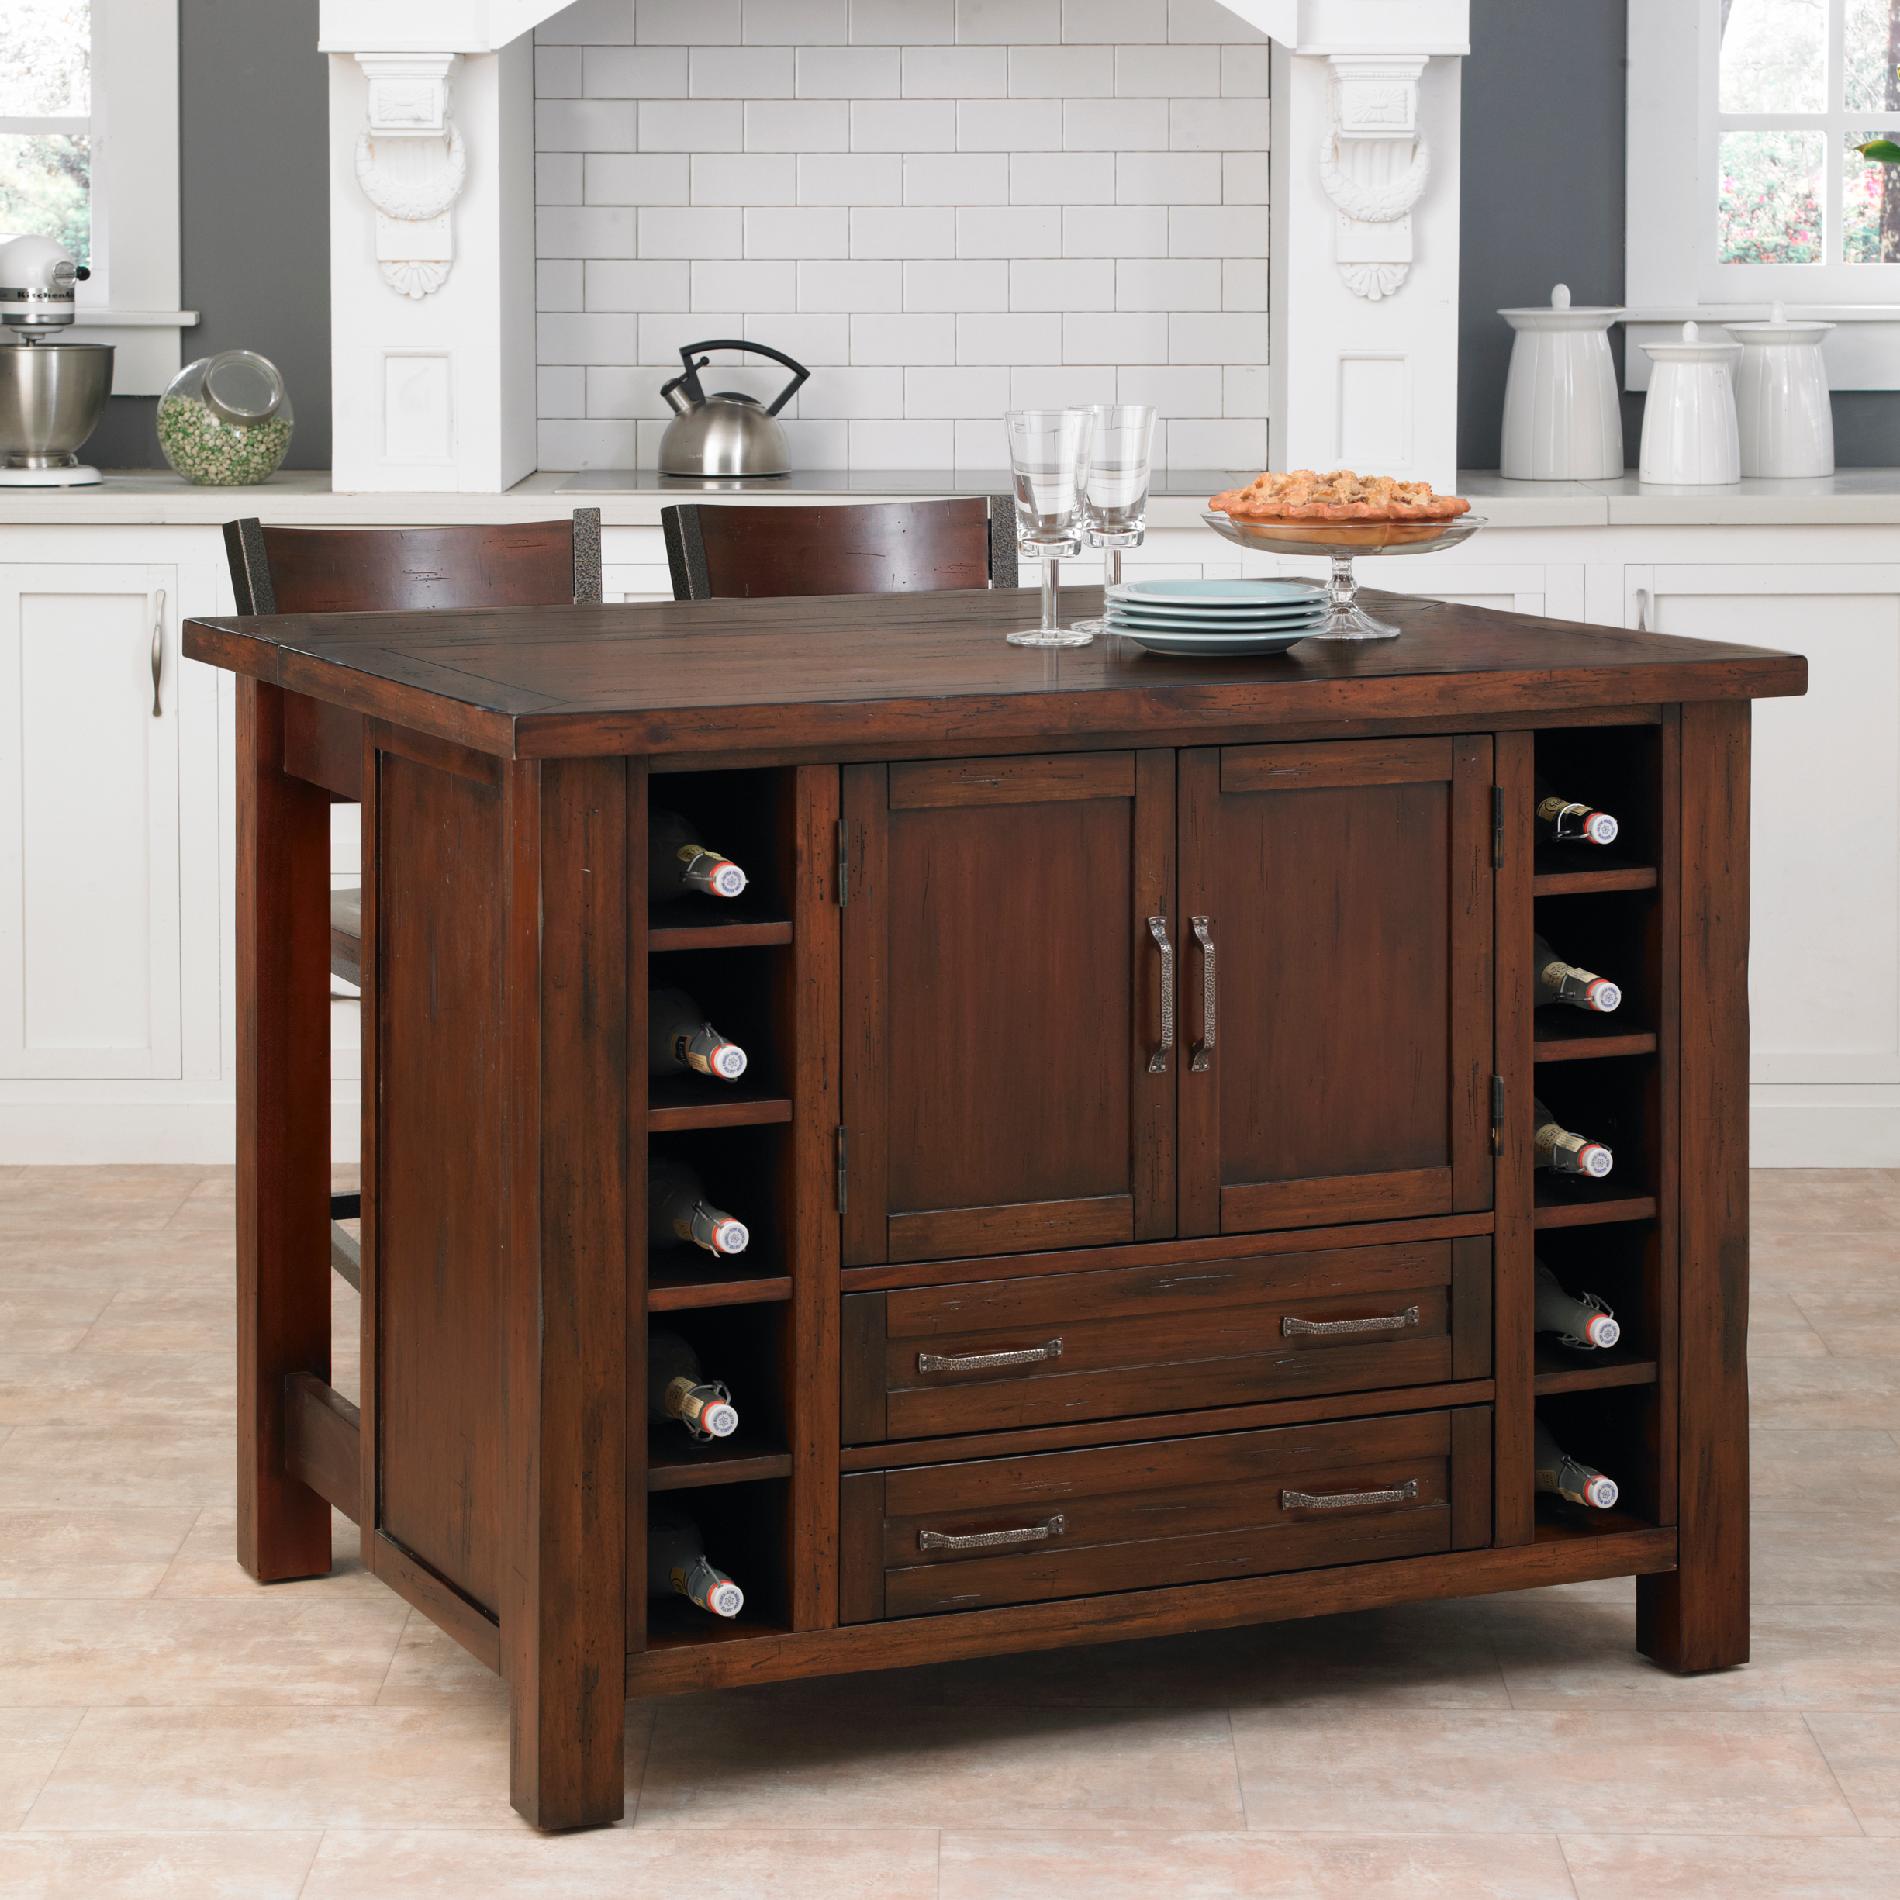 Home Styles Cabin Creek Kitchen Island with Breakfast Bar and Two